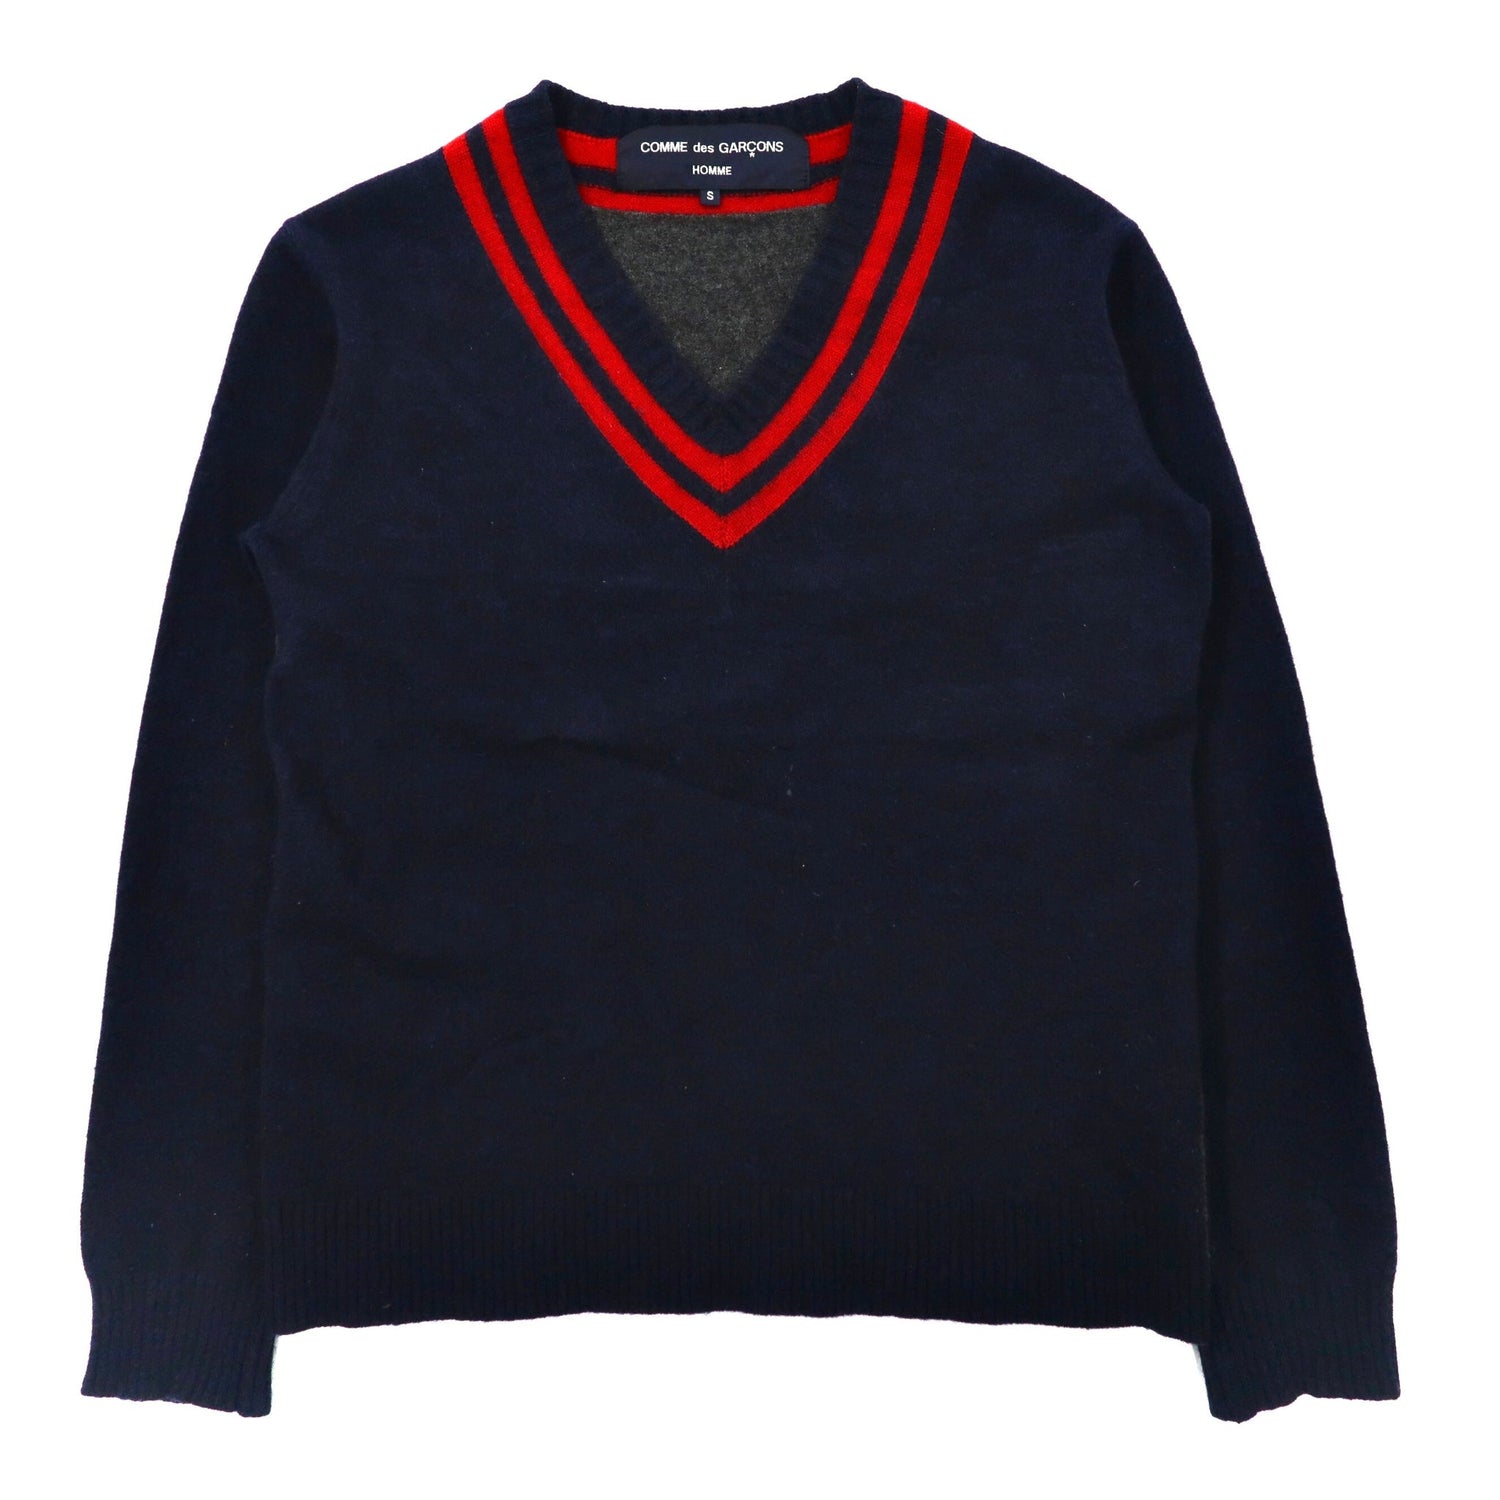 COMME des GARCONS HOMME Knit V-Neck Sweater S Navy Wool HH-N021 Japan MADE